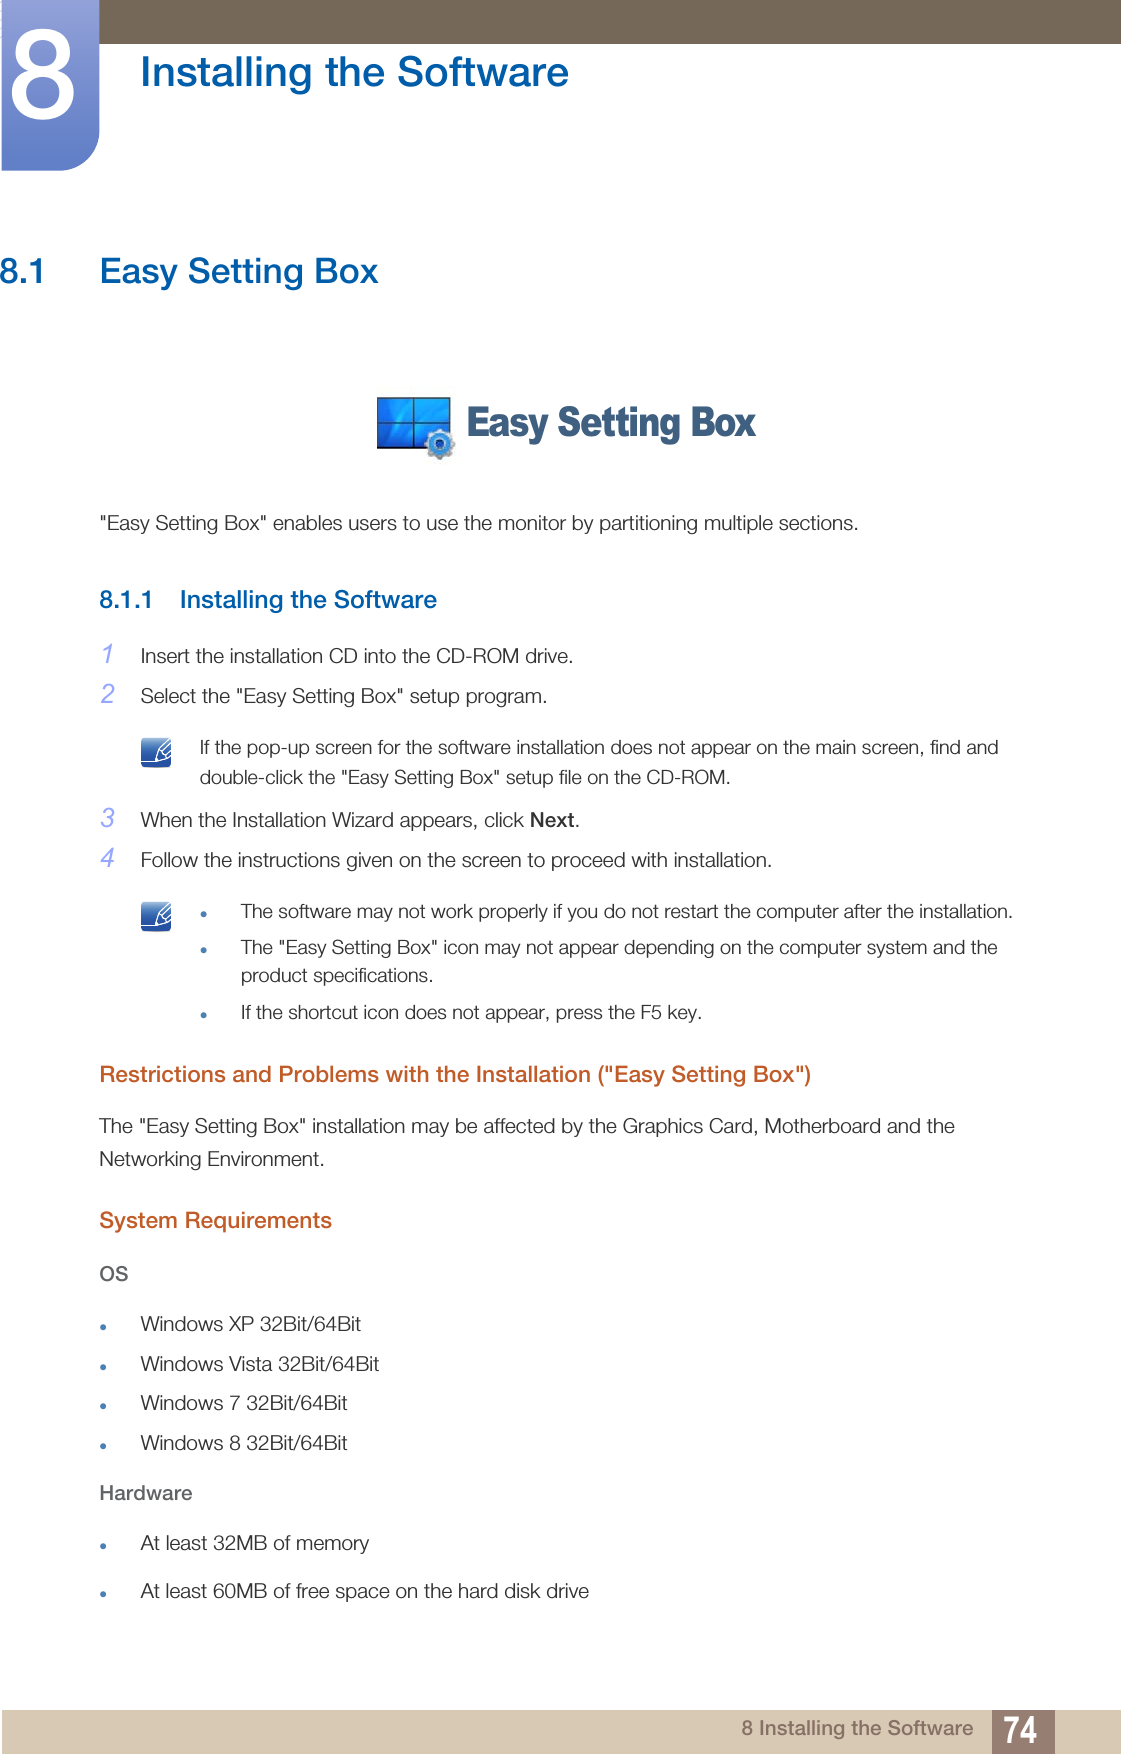 748 Installing the Software8  Installing the Software8.1 Easy Setting Box&quot;Easy Setting Box&quot; enables users to use the monitor by partitioning multiple sections.8.1.1 Installing the Software1Insert the installation CD into the CD-ROM drive.2Select the &quot;Easy Setting Box&quot; setup program. If the pop-up screen for the software installation does not appear on the main screen, find and double-click the &quot;Easy Setting Box&quot; setup file on the CD-ROM. 3When the Installation Wizard appears, click Next.4Follow the instructions given on the screen to proceed with installation. The software may not work properly if you do not restart the computer after the installation.The &quot;Easy Setting Box&quot; icon may not appear depending on the computer system and the product specifications.If the shortcut icon does not appear, press the F5 key. Restrictions and Problems with the Installation (&quot;Easy Setting Box&quot;)The &quot;Easy Setting Box&quot; installation may be affected by the Graphics Card, Motherboard and the Networking Environment.System RequirementsOSWindows XP 32Bit/64BitWindows Vista 32Bit/64BitWindows 7 32Bit/64BitWindows 8 32Bit/64BitHardwareAt least 32MB of memoryAt least 60MB of free space on the hard disk driveEasy Setting Box